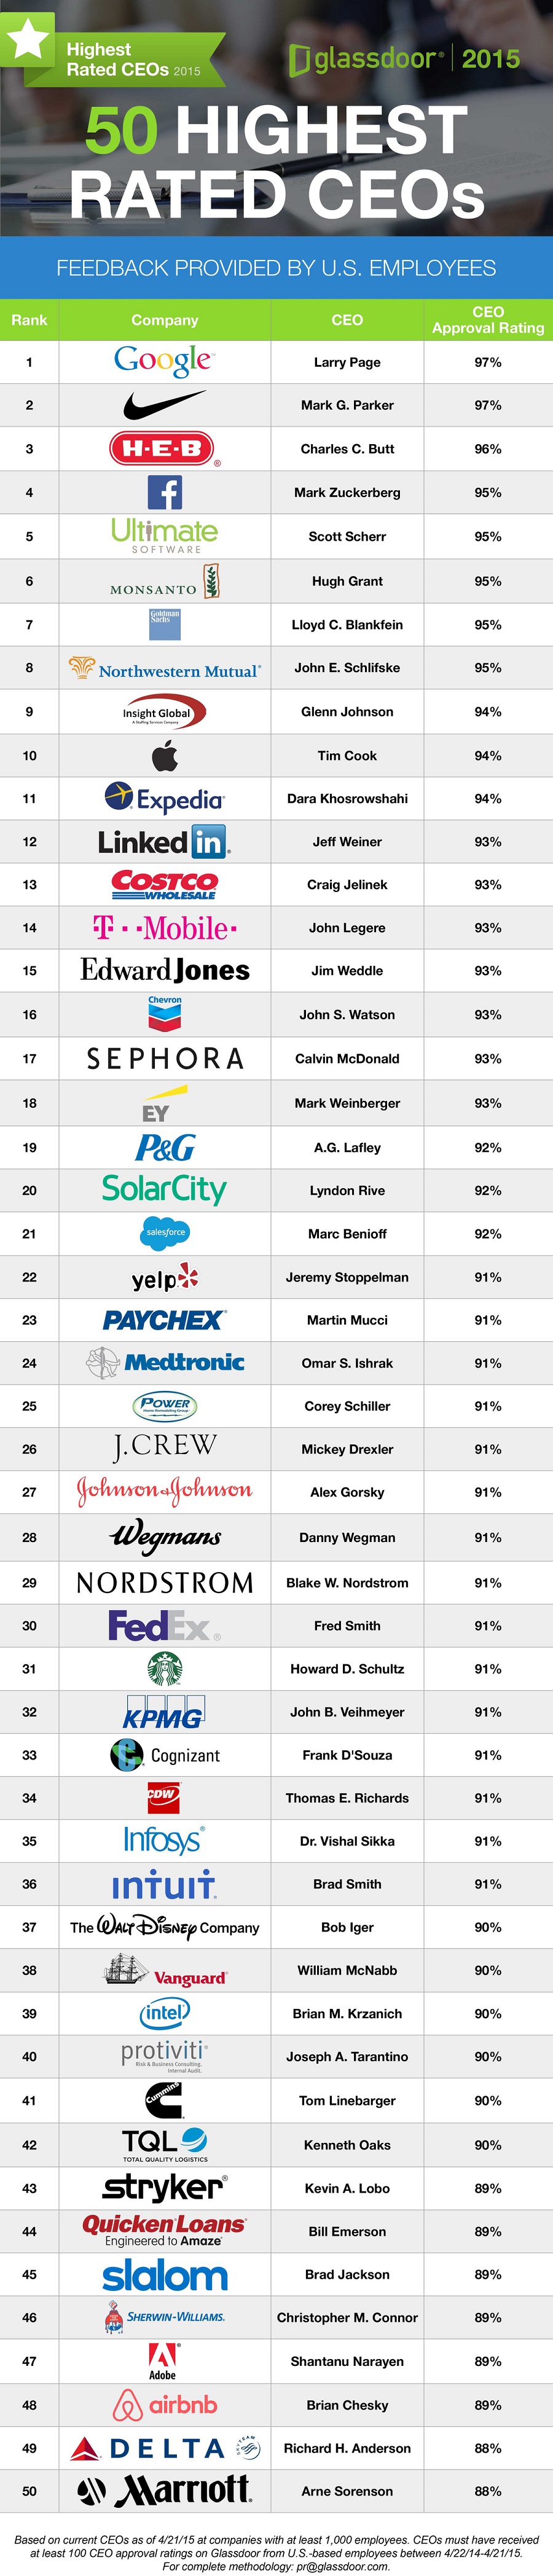 Top 50 CEOs of America in 2015